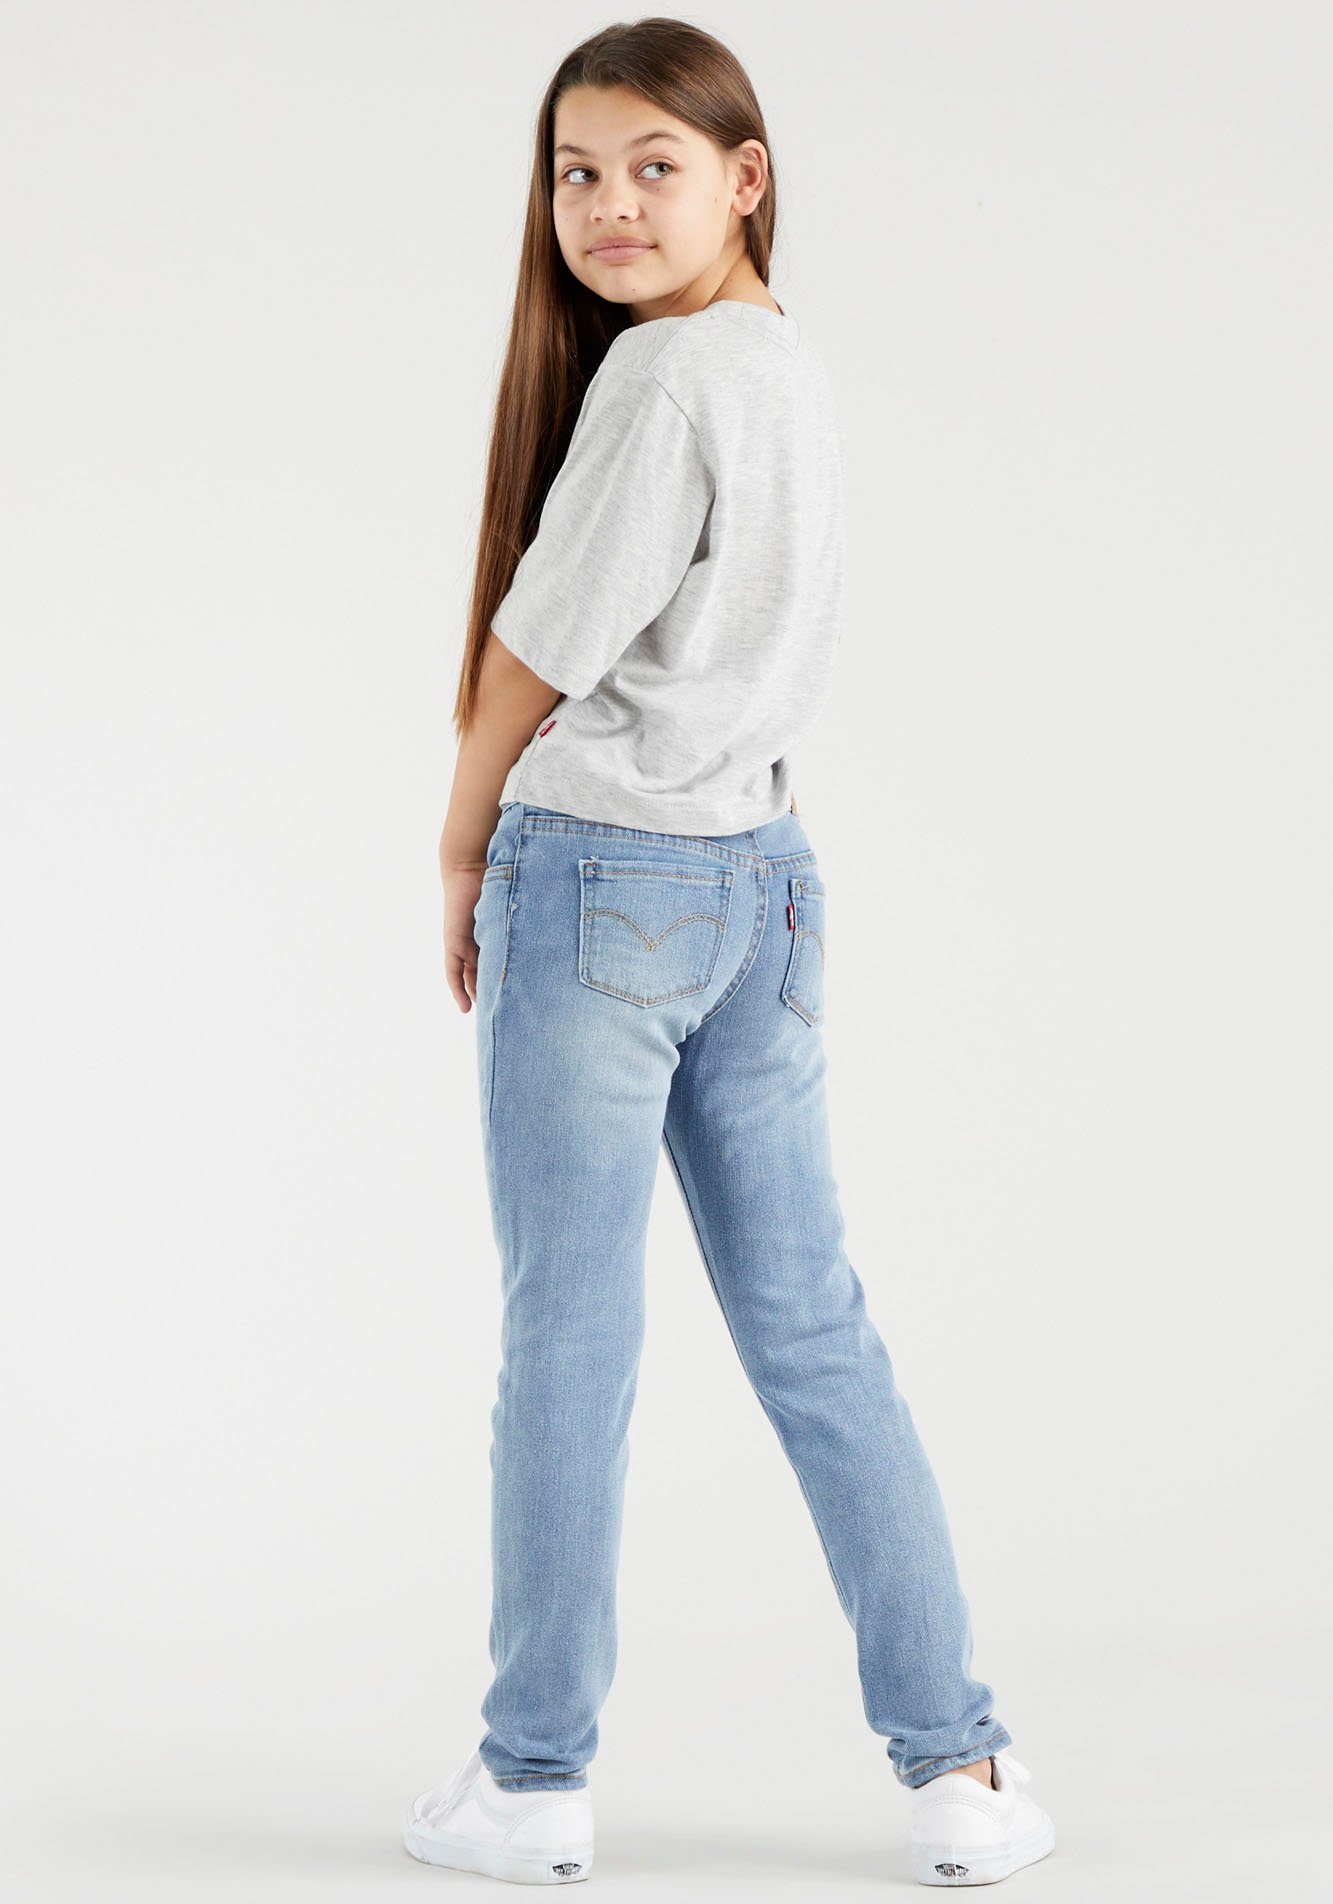 Kids GIRLS Levi's® Stretch-Jeans SKINNY used FIT for JEANS SUPER 710™ bleached